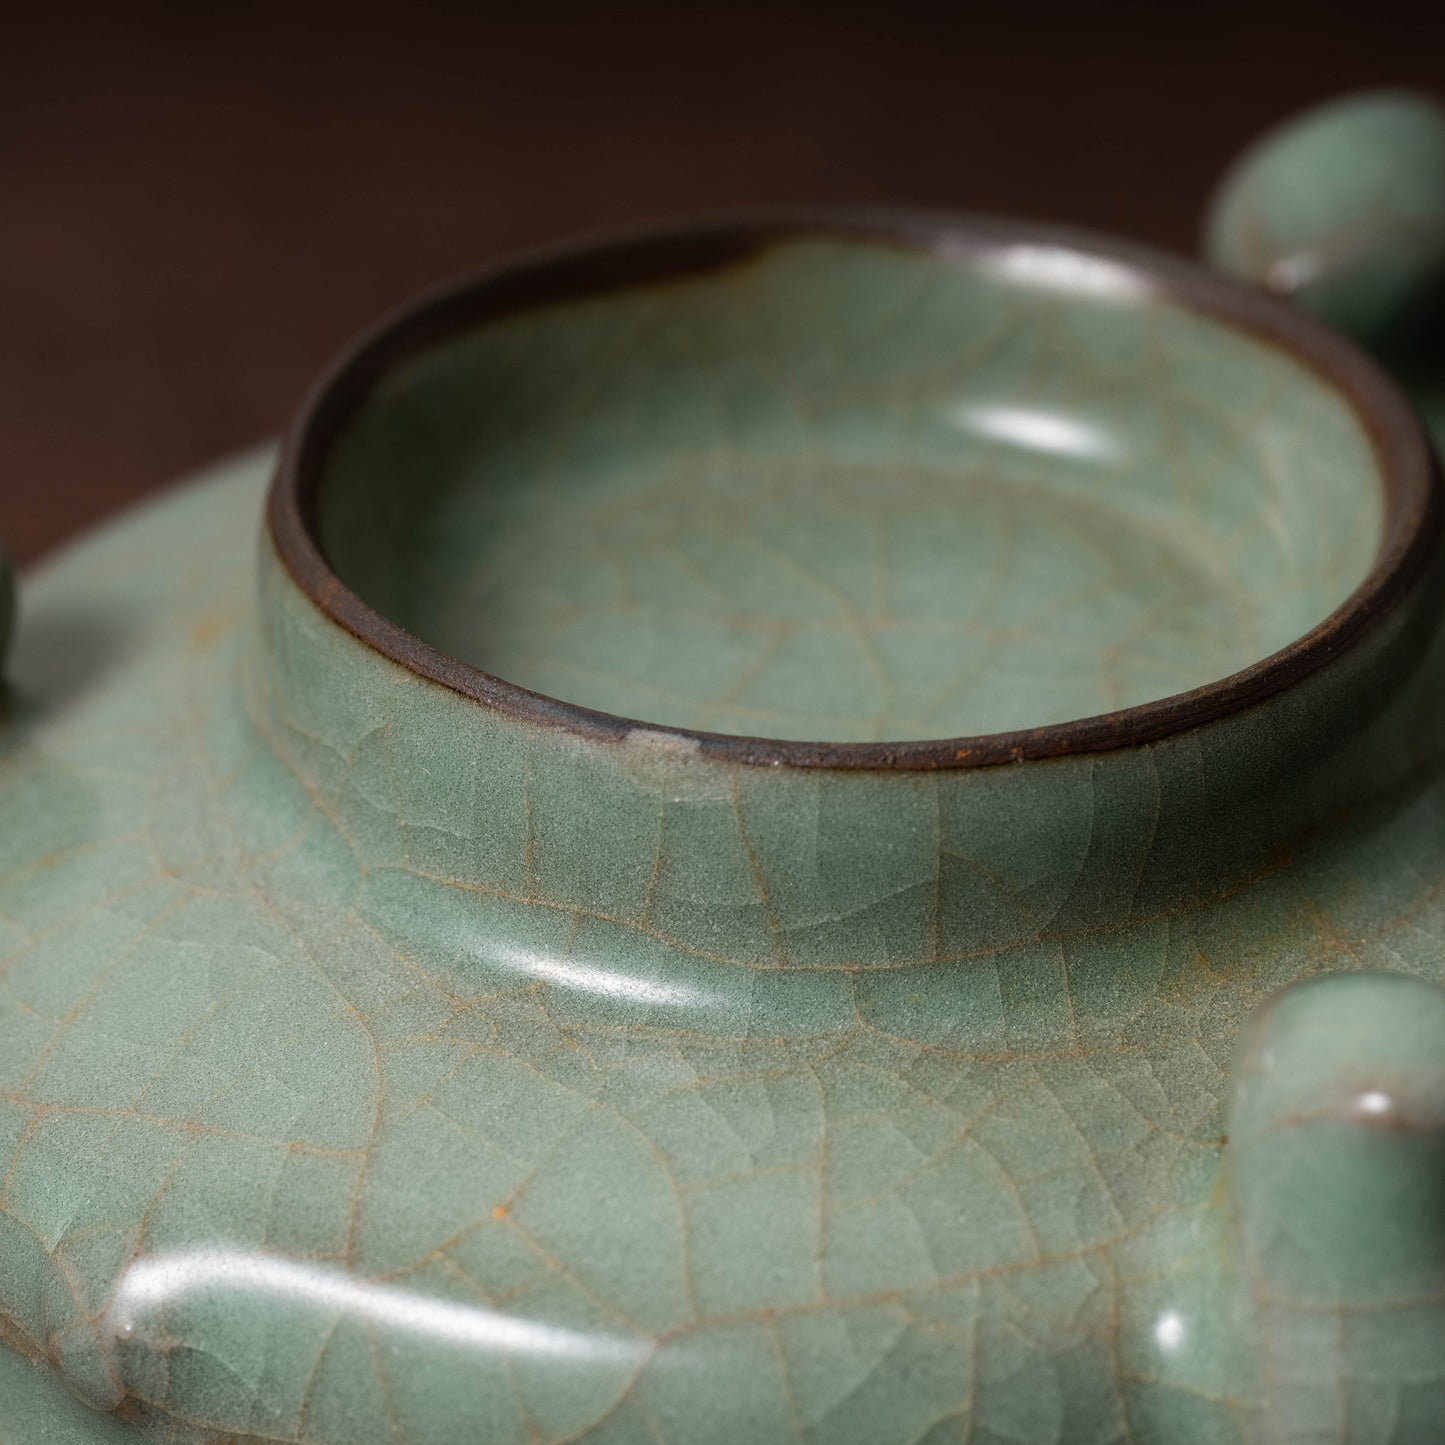 Southern Song Dynasty Guan ware Celadon Censer with Rivet and Three legs